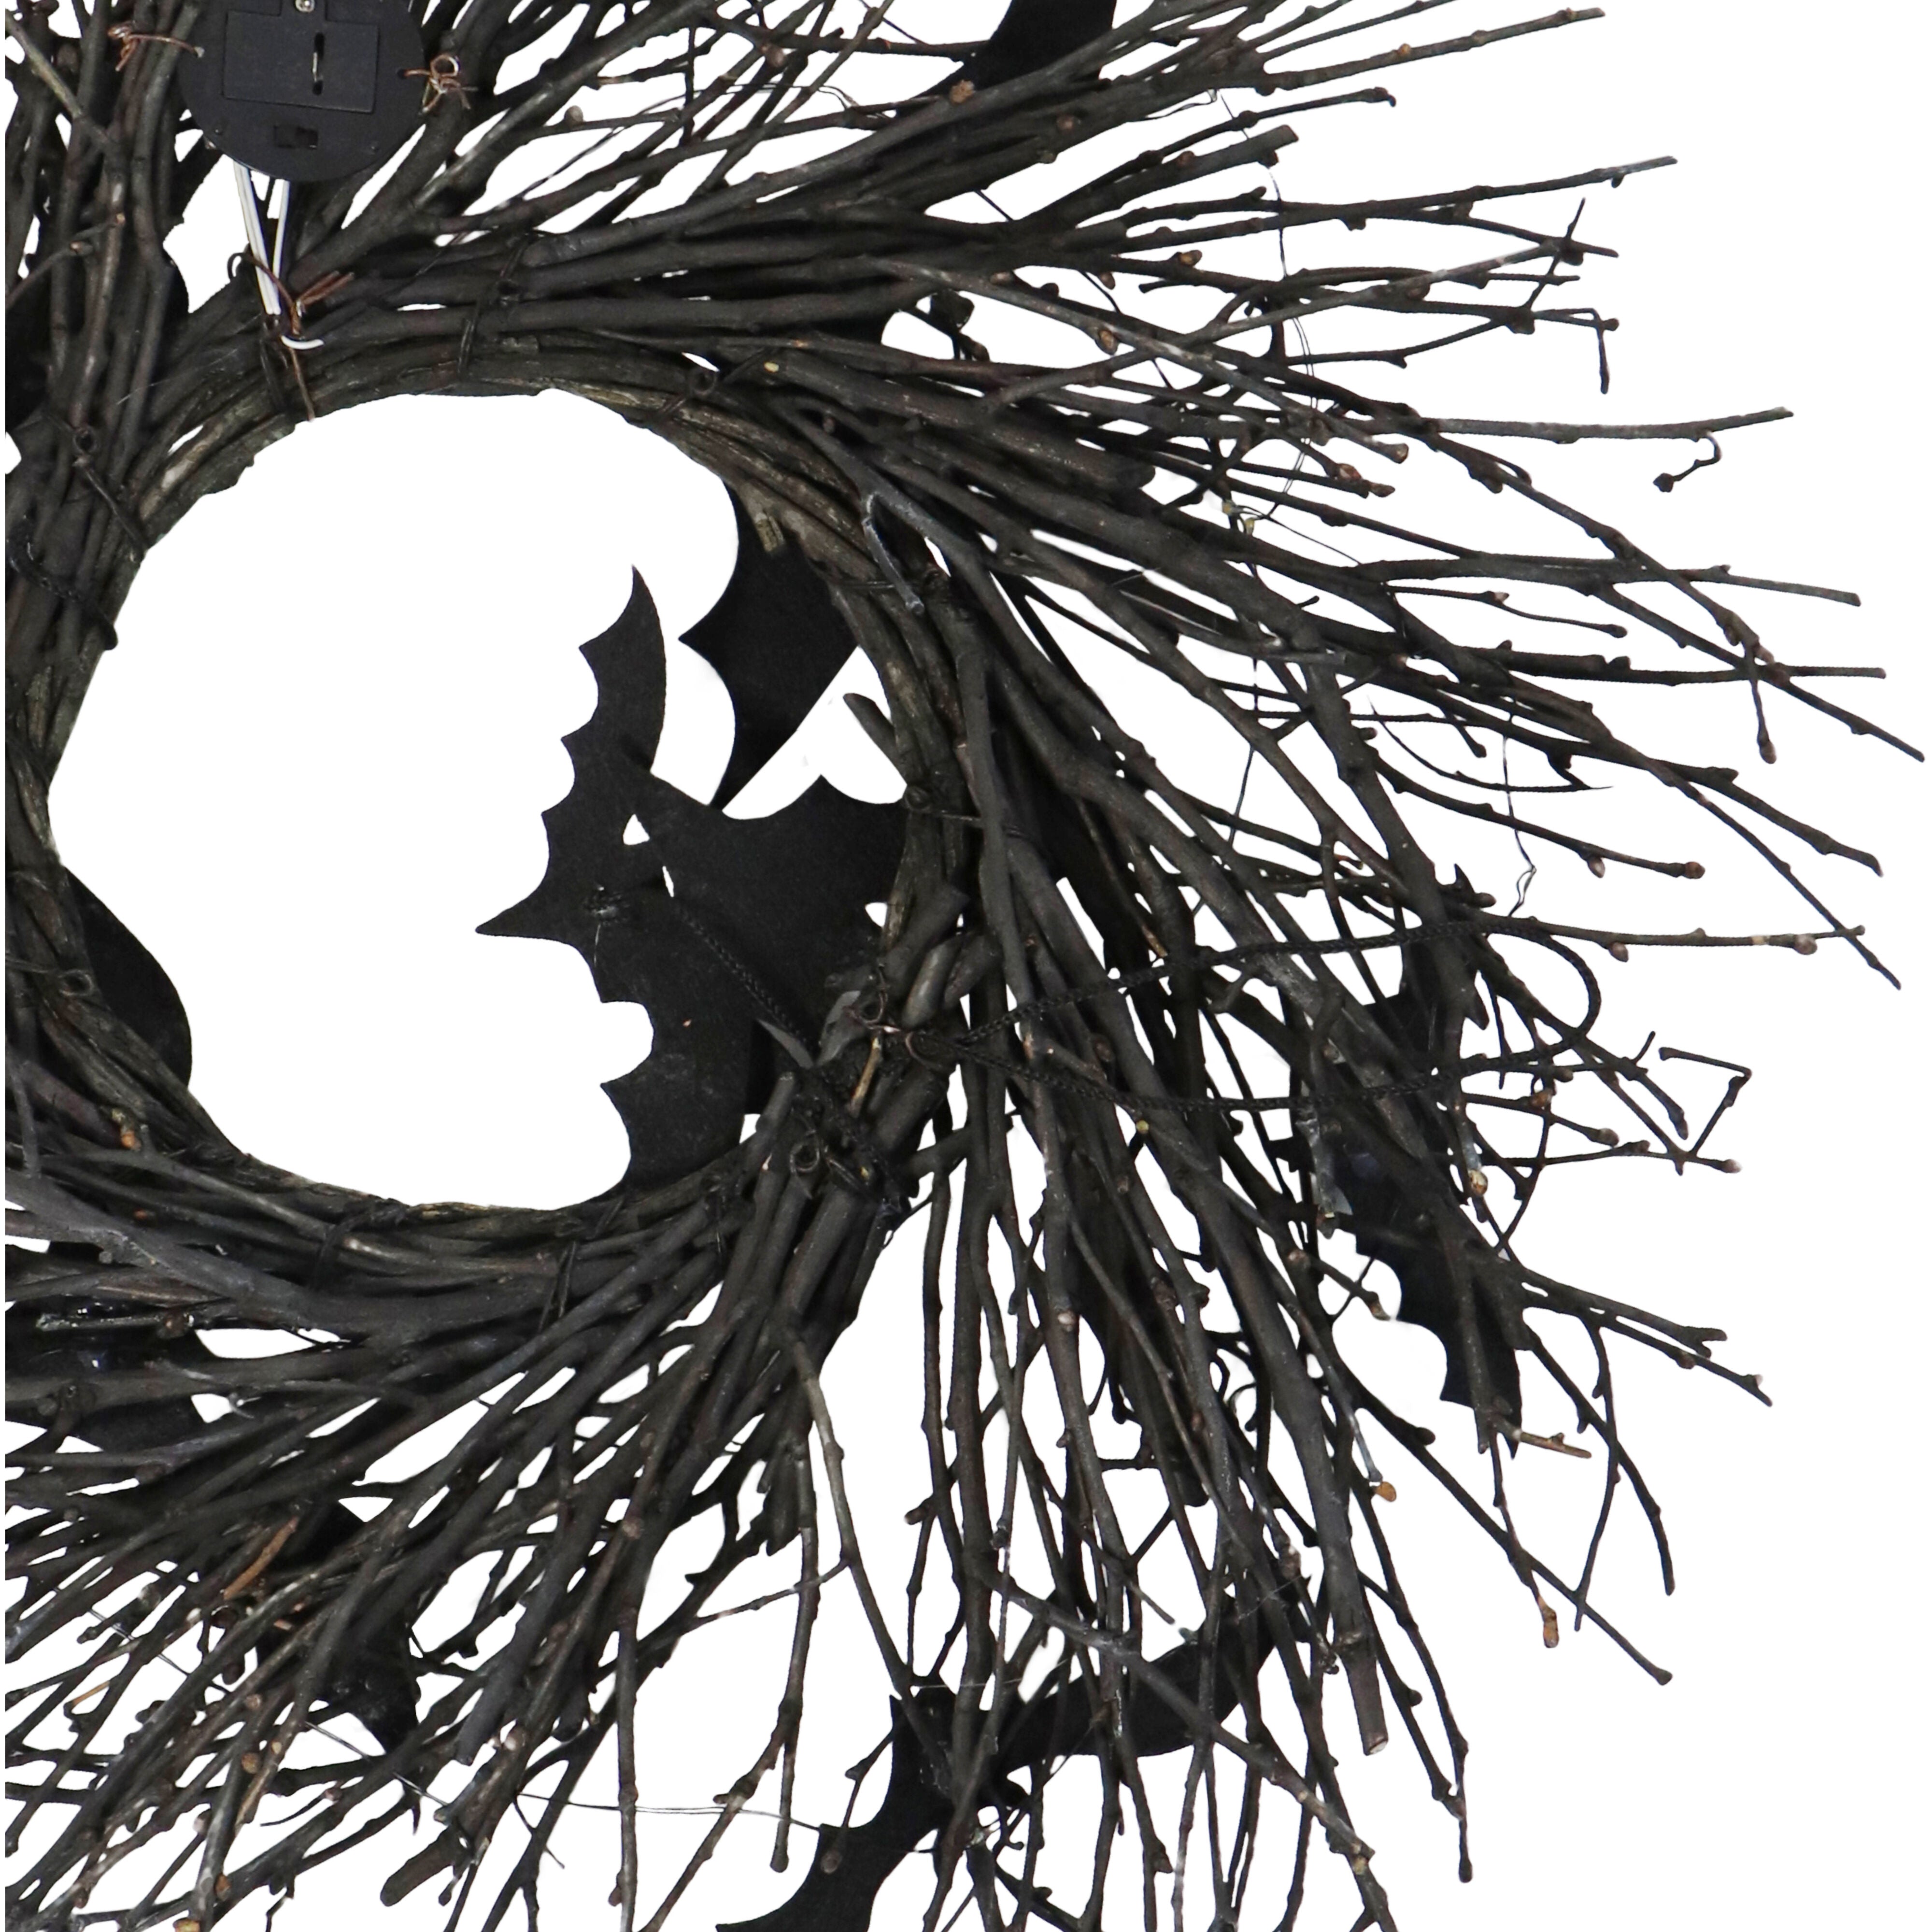 Haunted Hill Farm - 15-In. Black Twig Battery-Operated Wreath with LED Lights and Flying Bats for Halloween Door or Wall Decoration